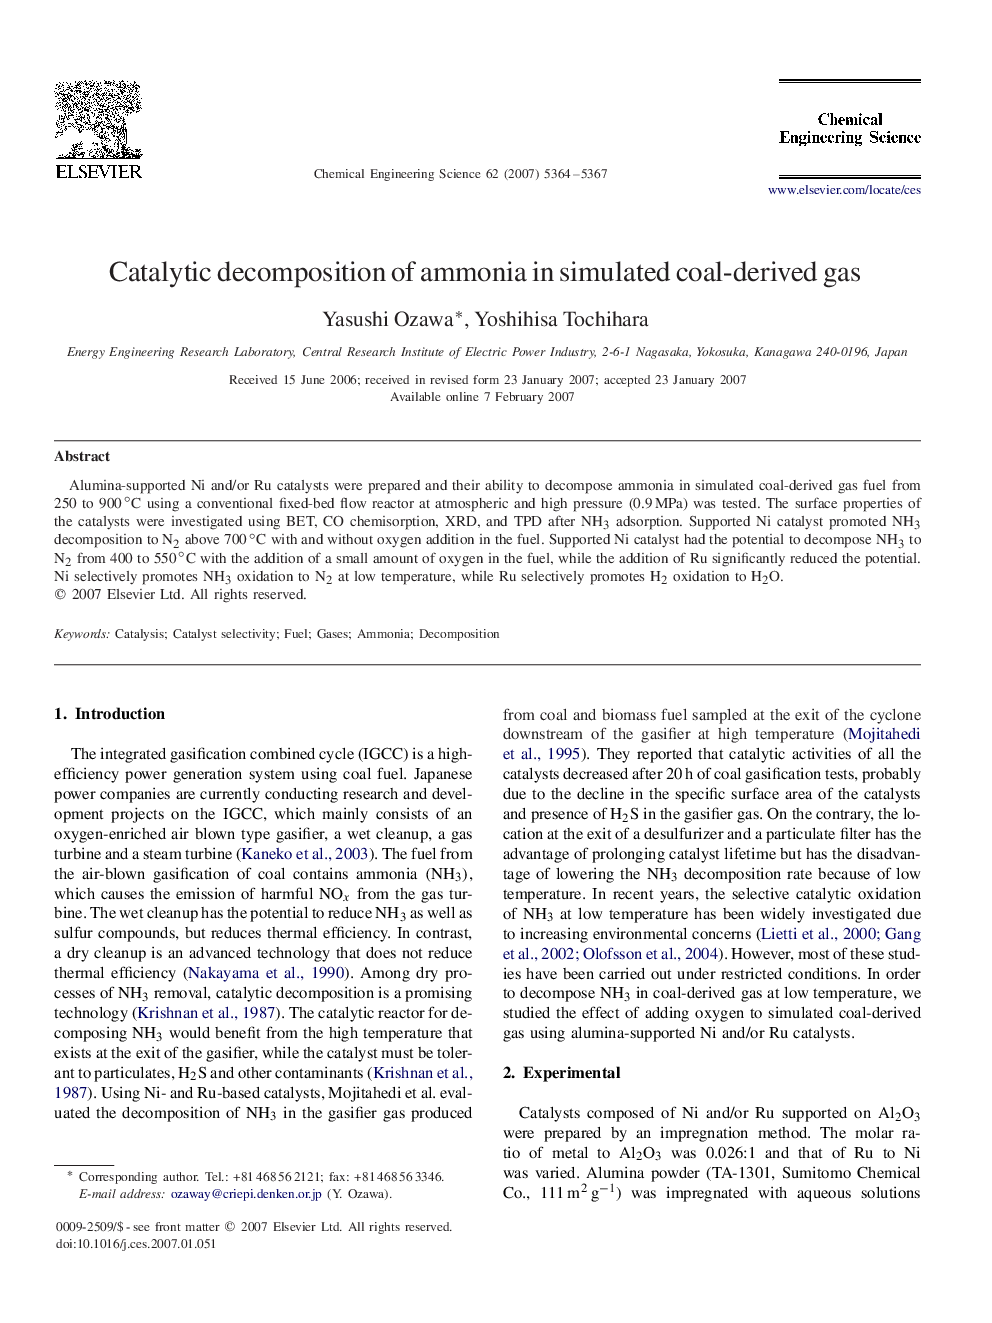 Catalytic decomposition of ammonia in simulated coal-derived gas